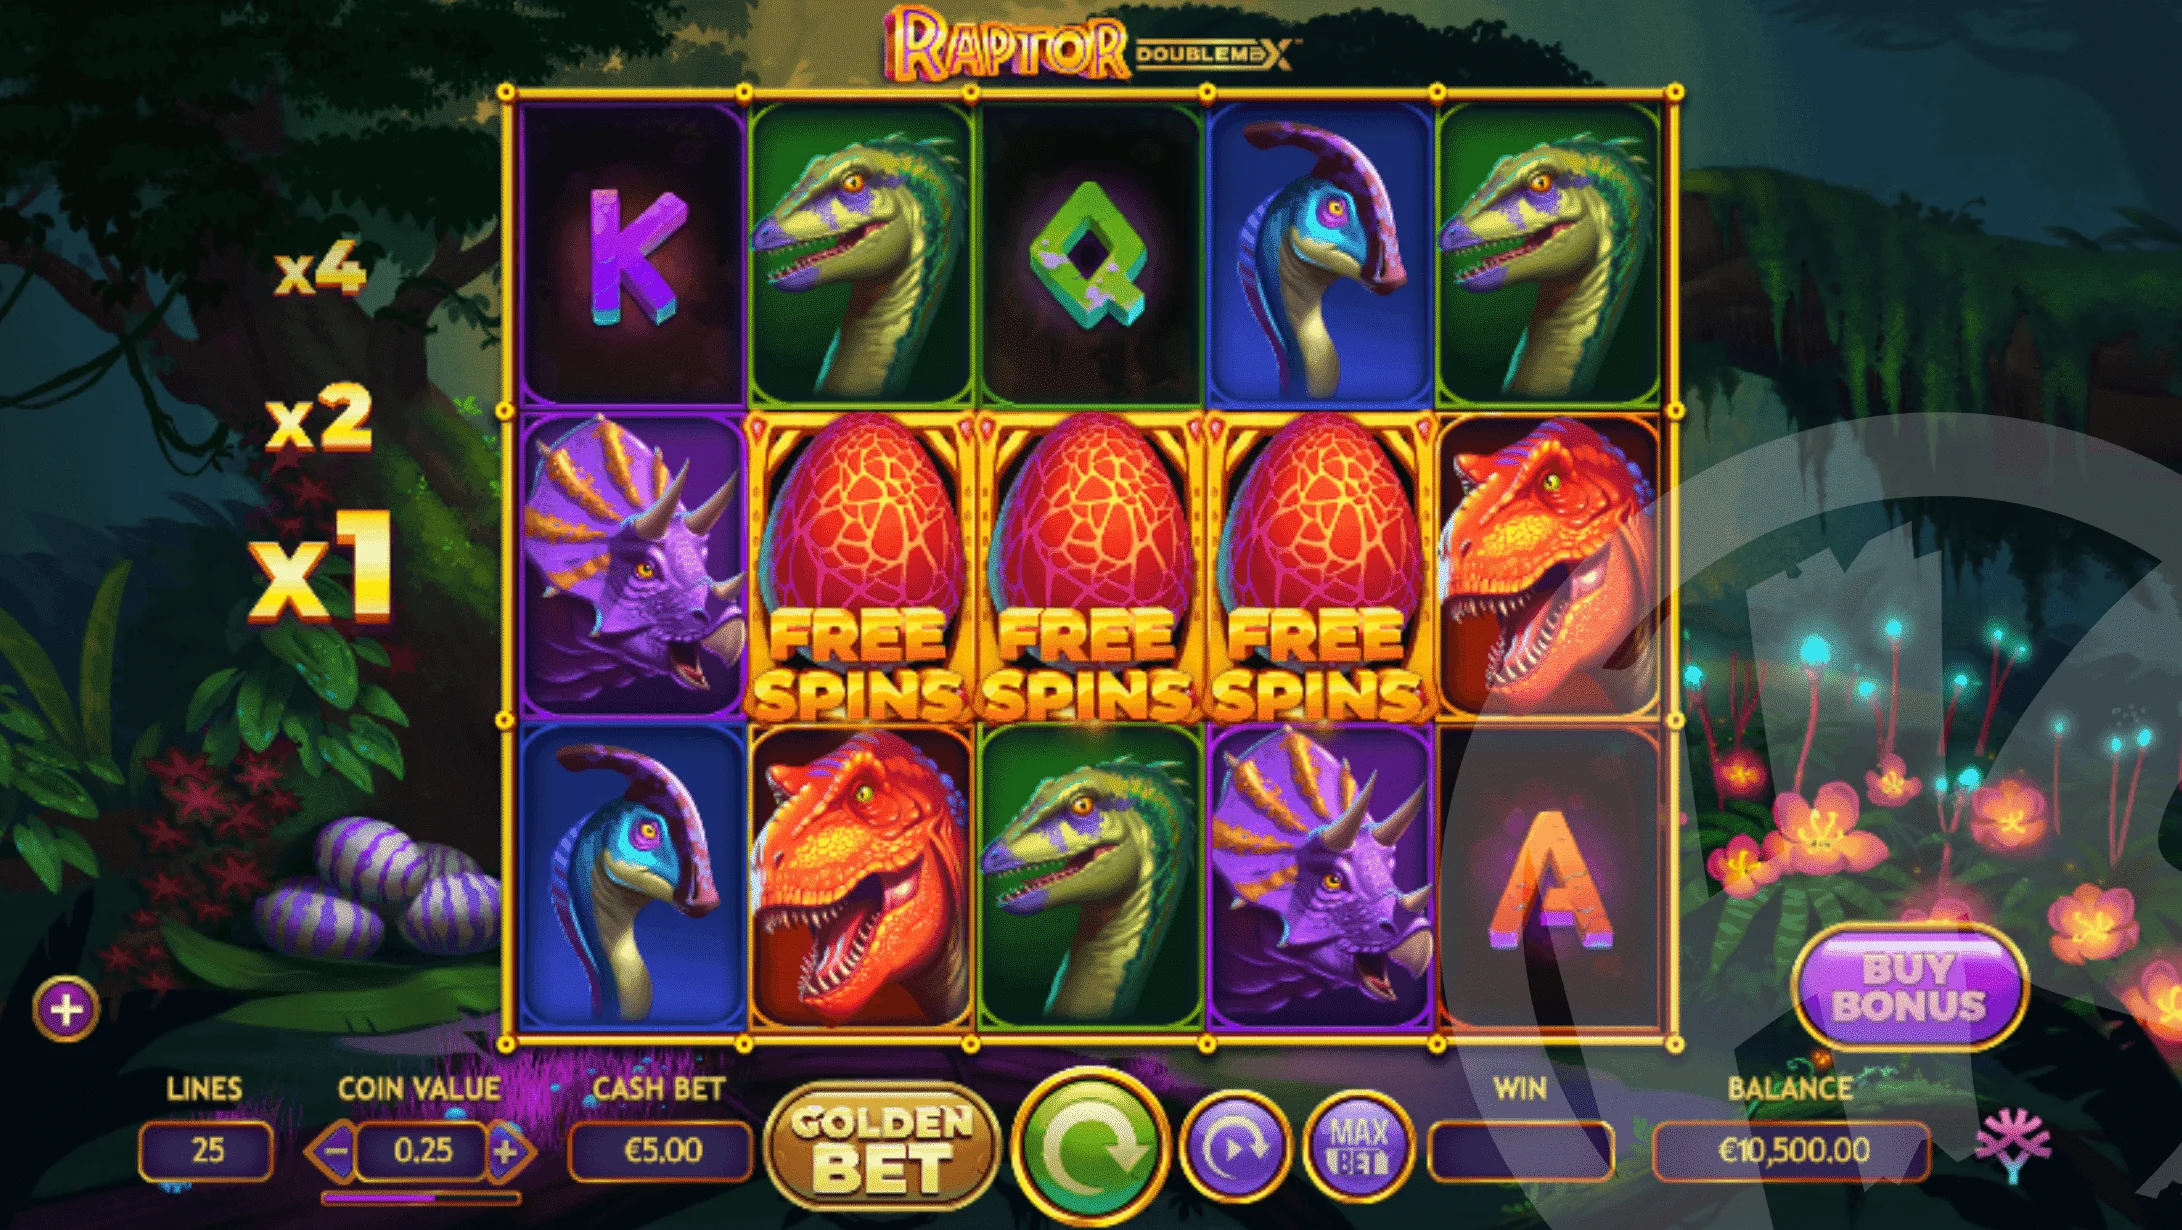 3+ Scatters Triggers Free Spins